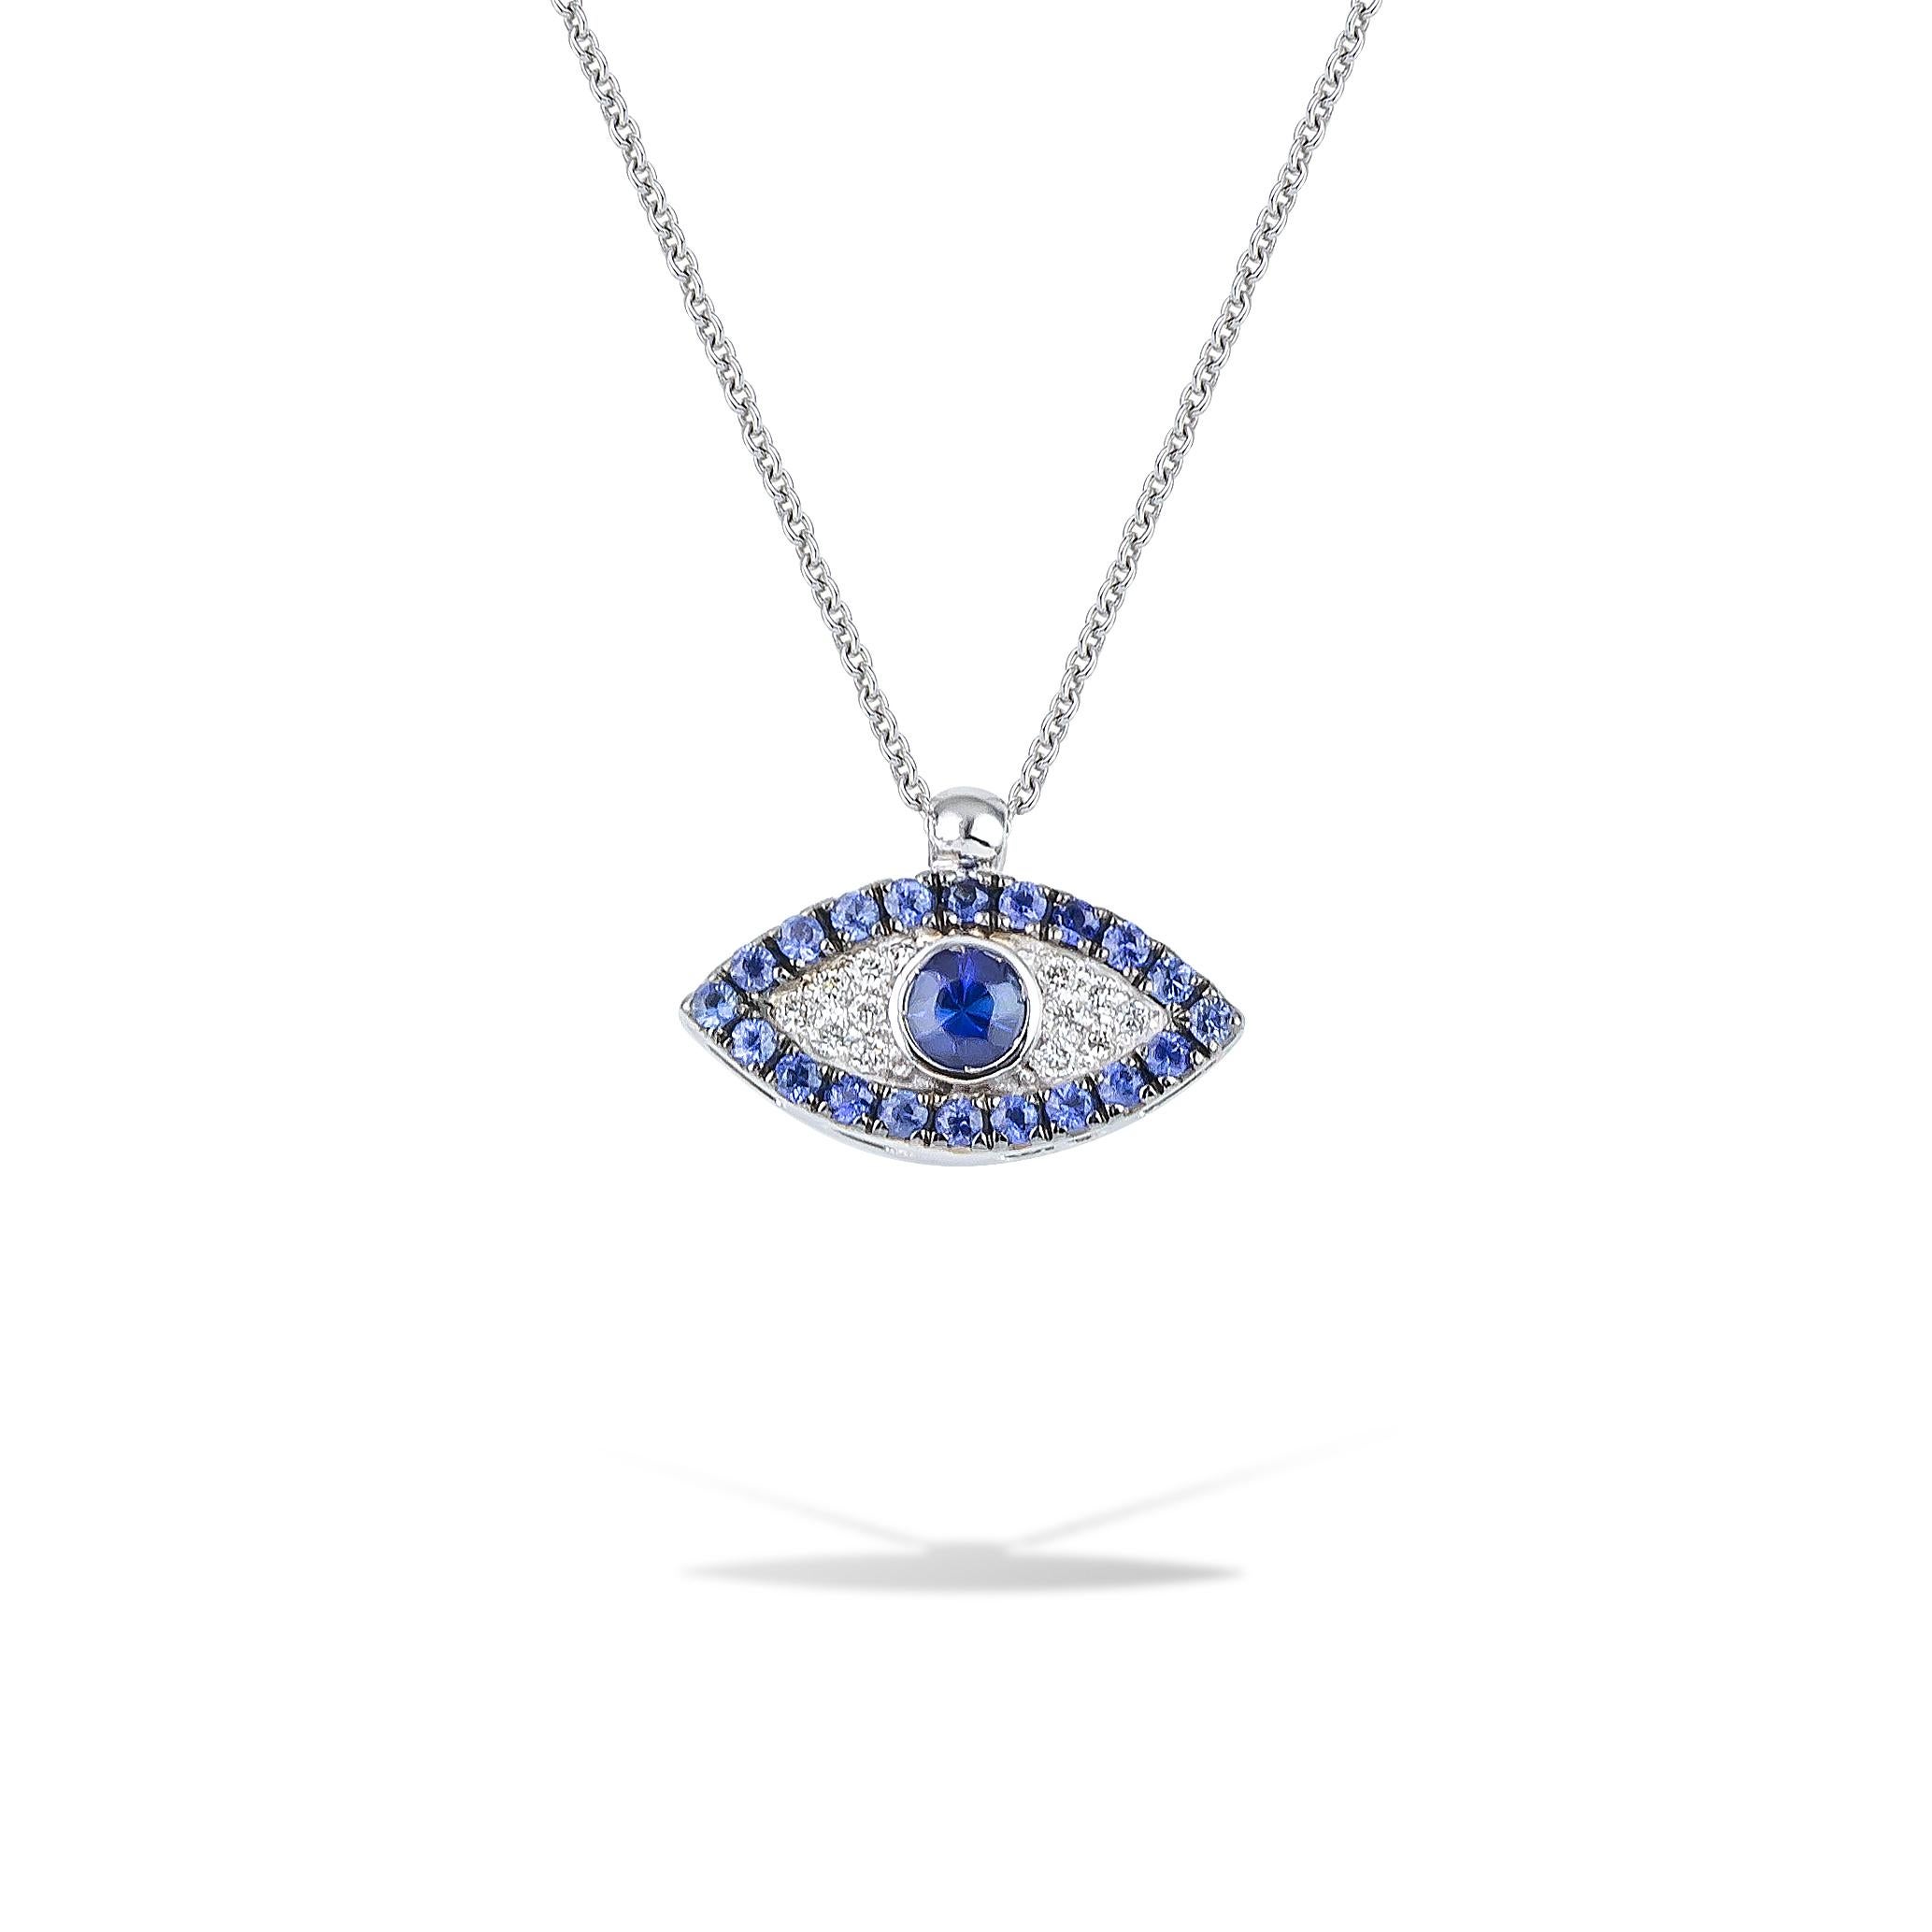 Greek Evil Eye pendant necklace handcrafted in 18Kt gold blue sapphire and diamonds. 
A frame of blue sapphires surrounds the white pave diamonds and they create the shape of an eye. In the greek culture the evil eye protects the one who wears it